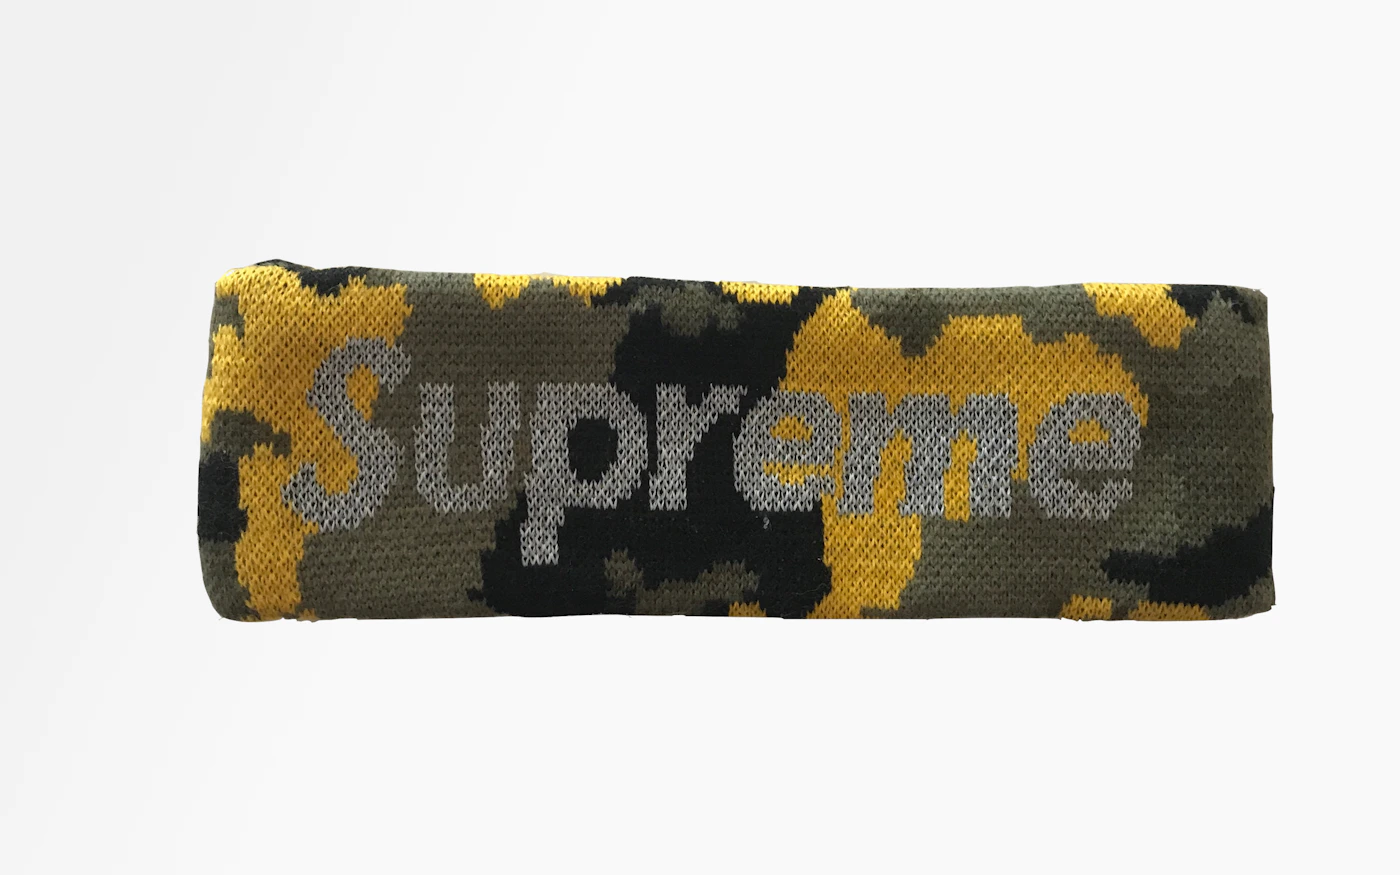 Yo just need a quick legit check on this supreme headband. Pretty sure but  need some extra reassurance. : r/Supreme